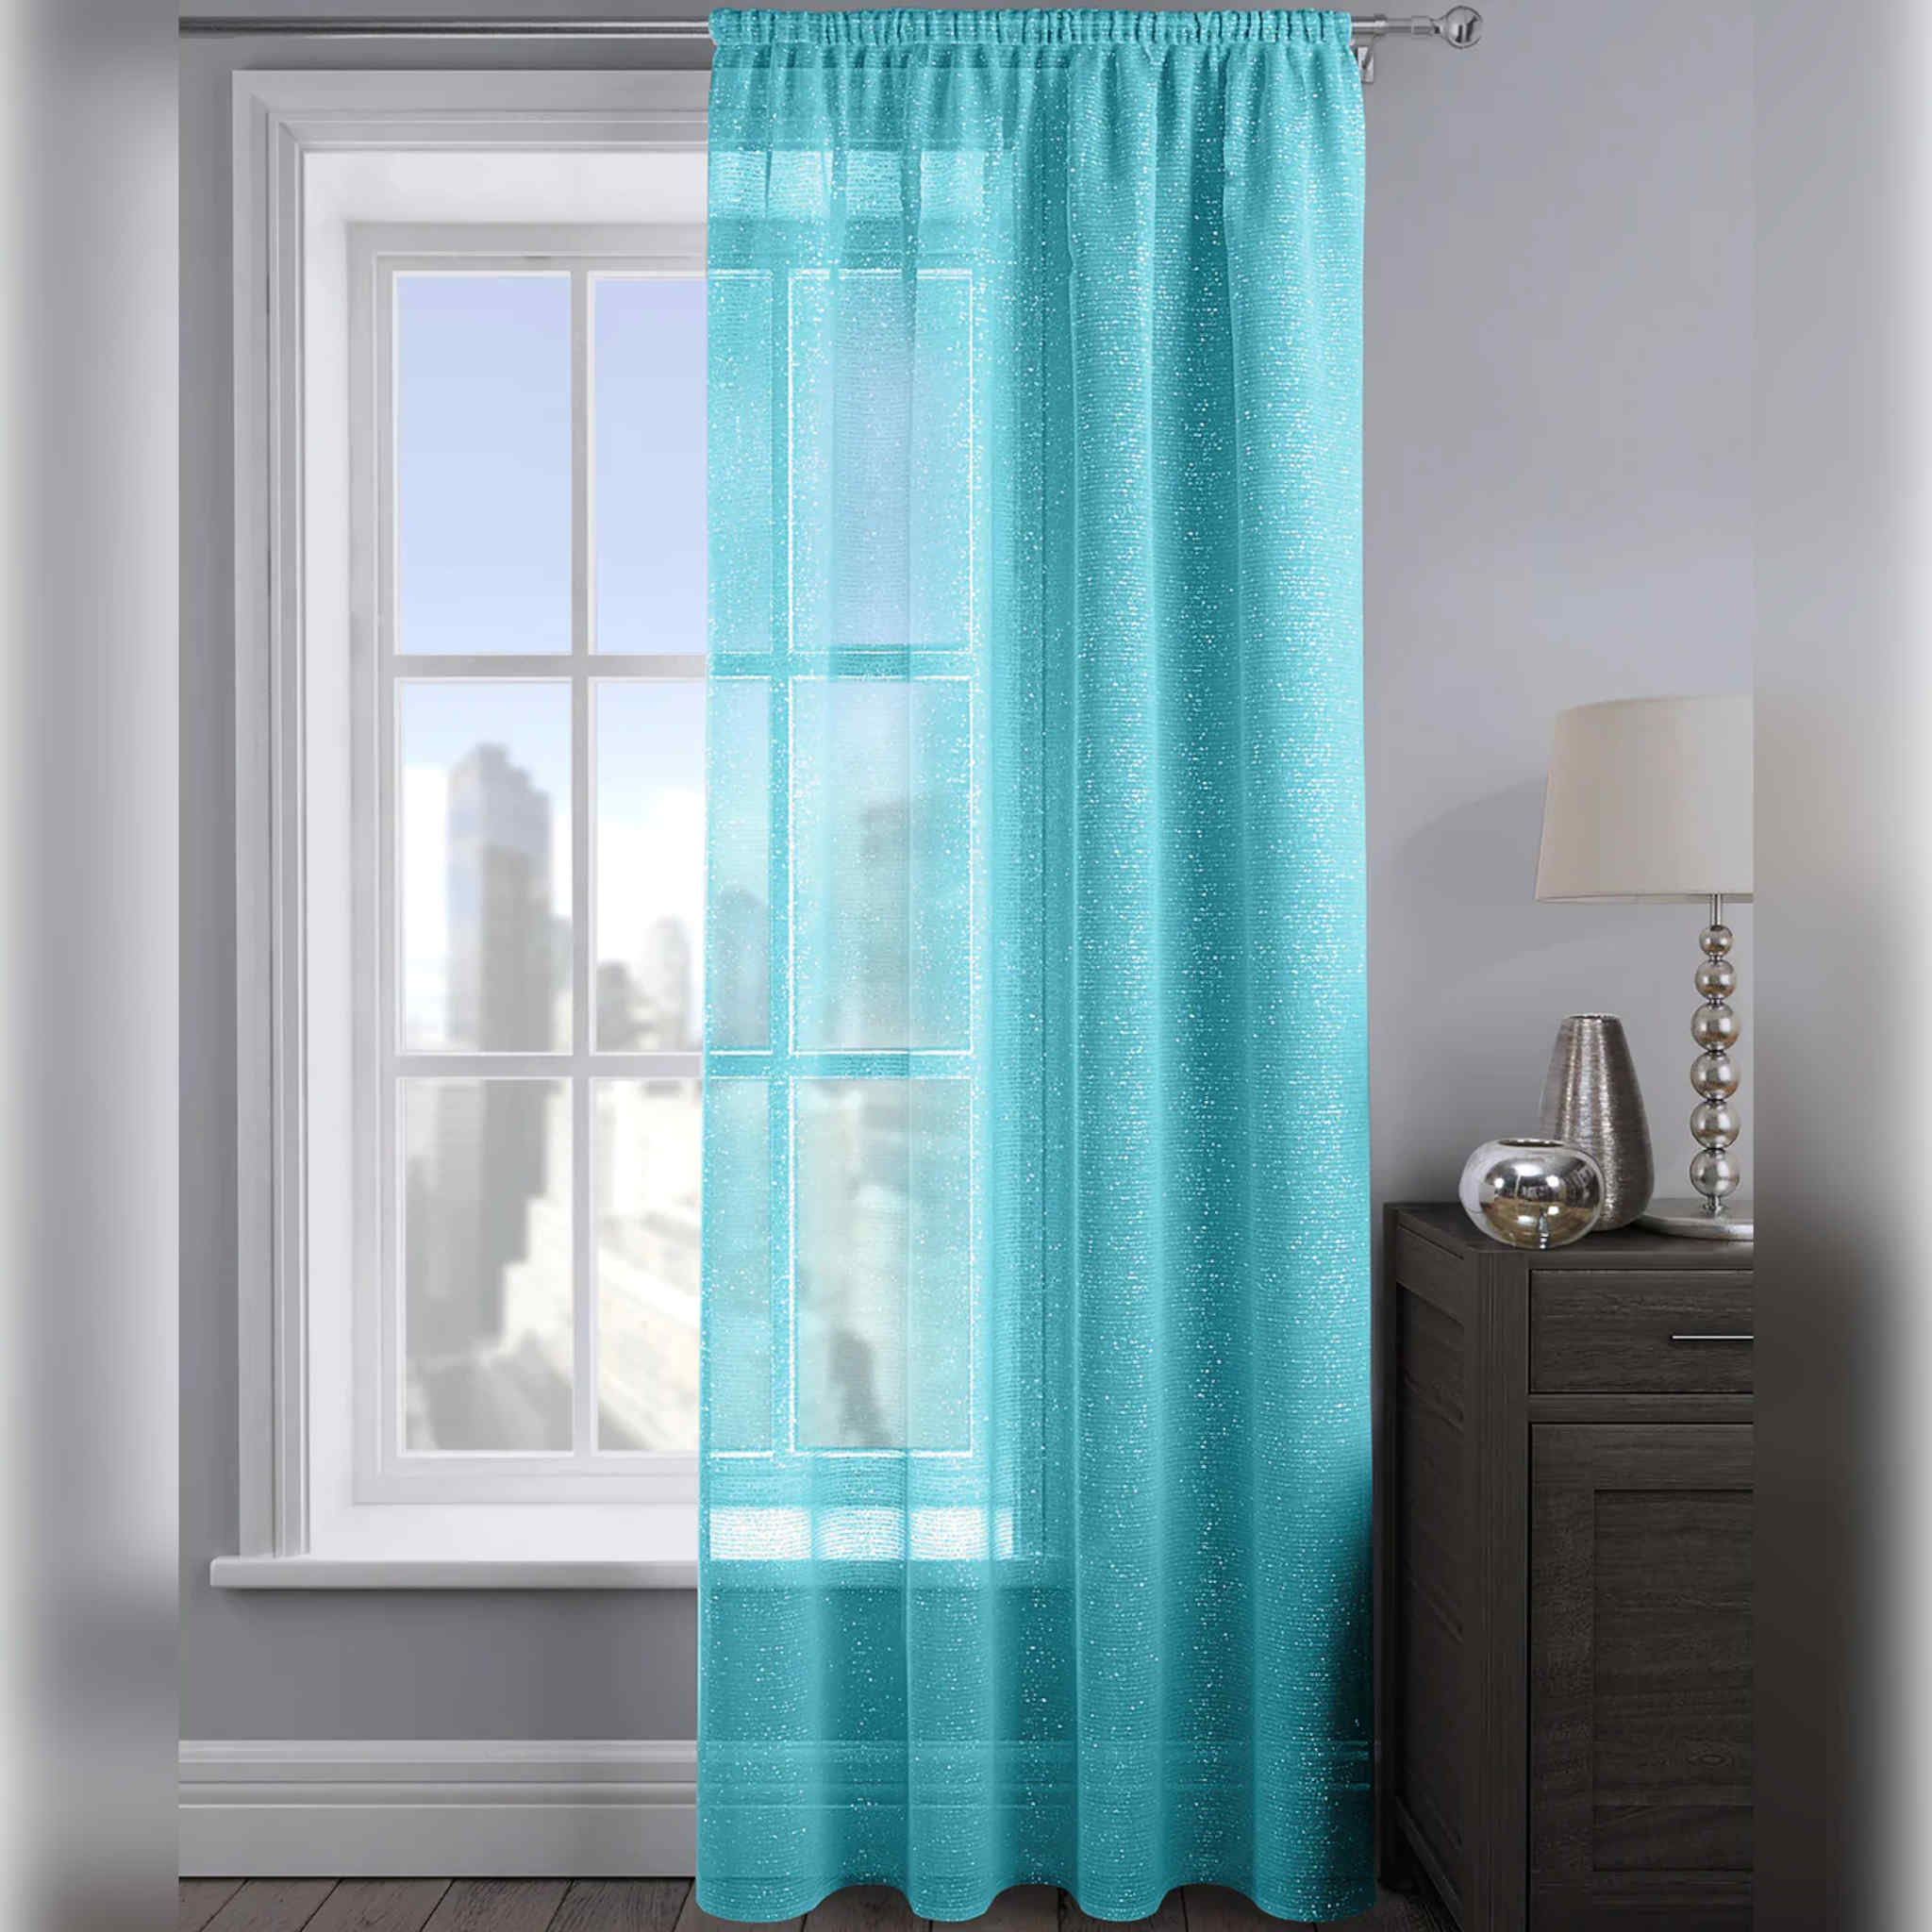 Velosso Alessandria Voile Panels Tape Top Curtains | 54x72in